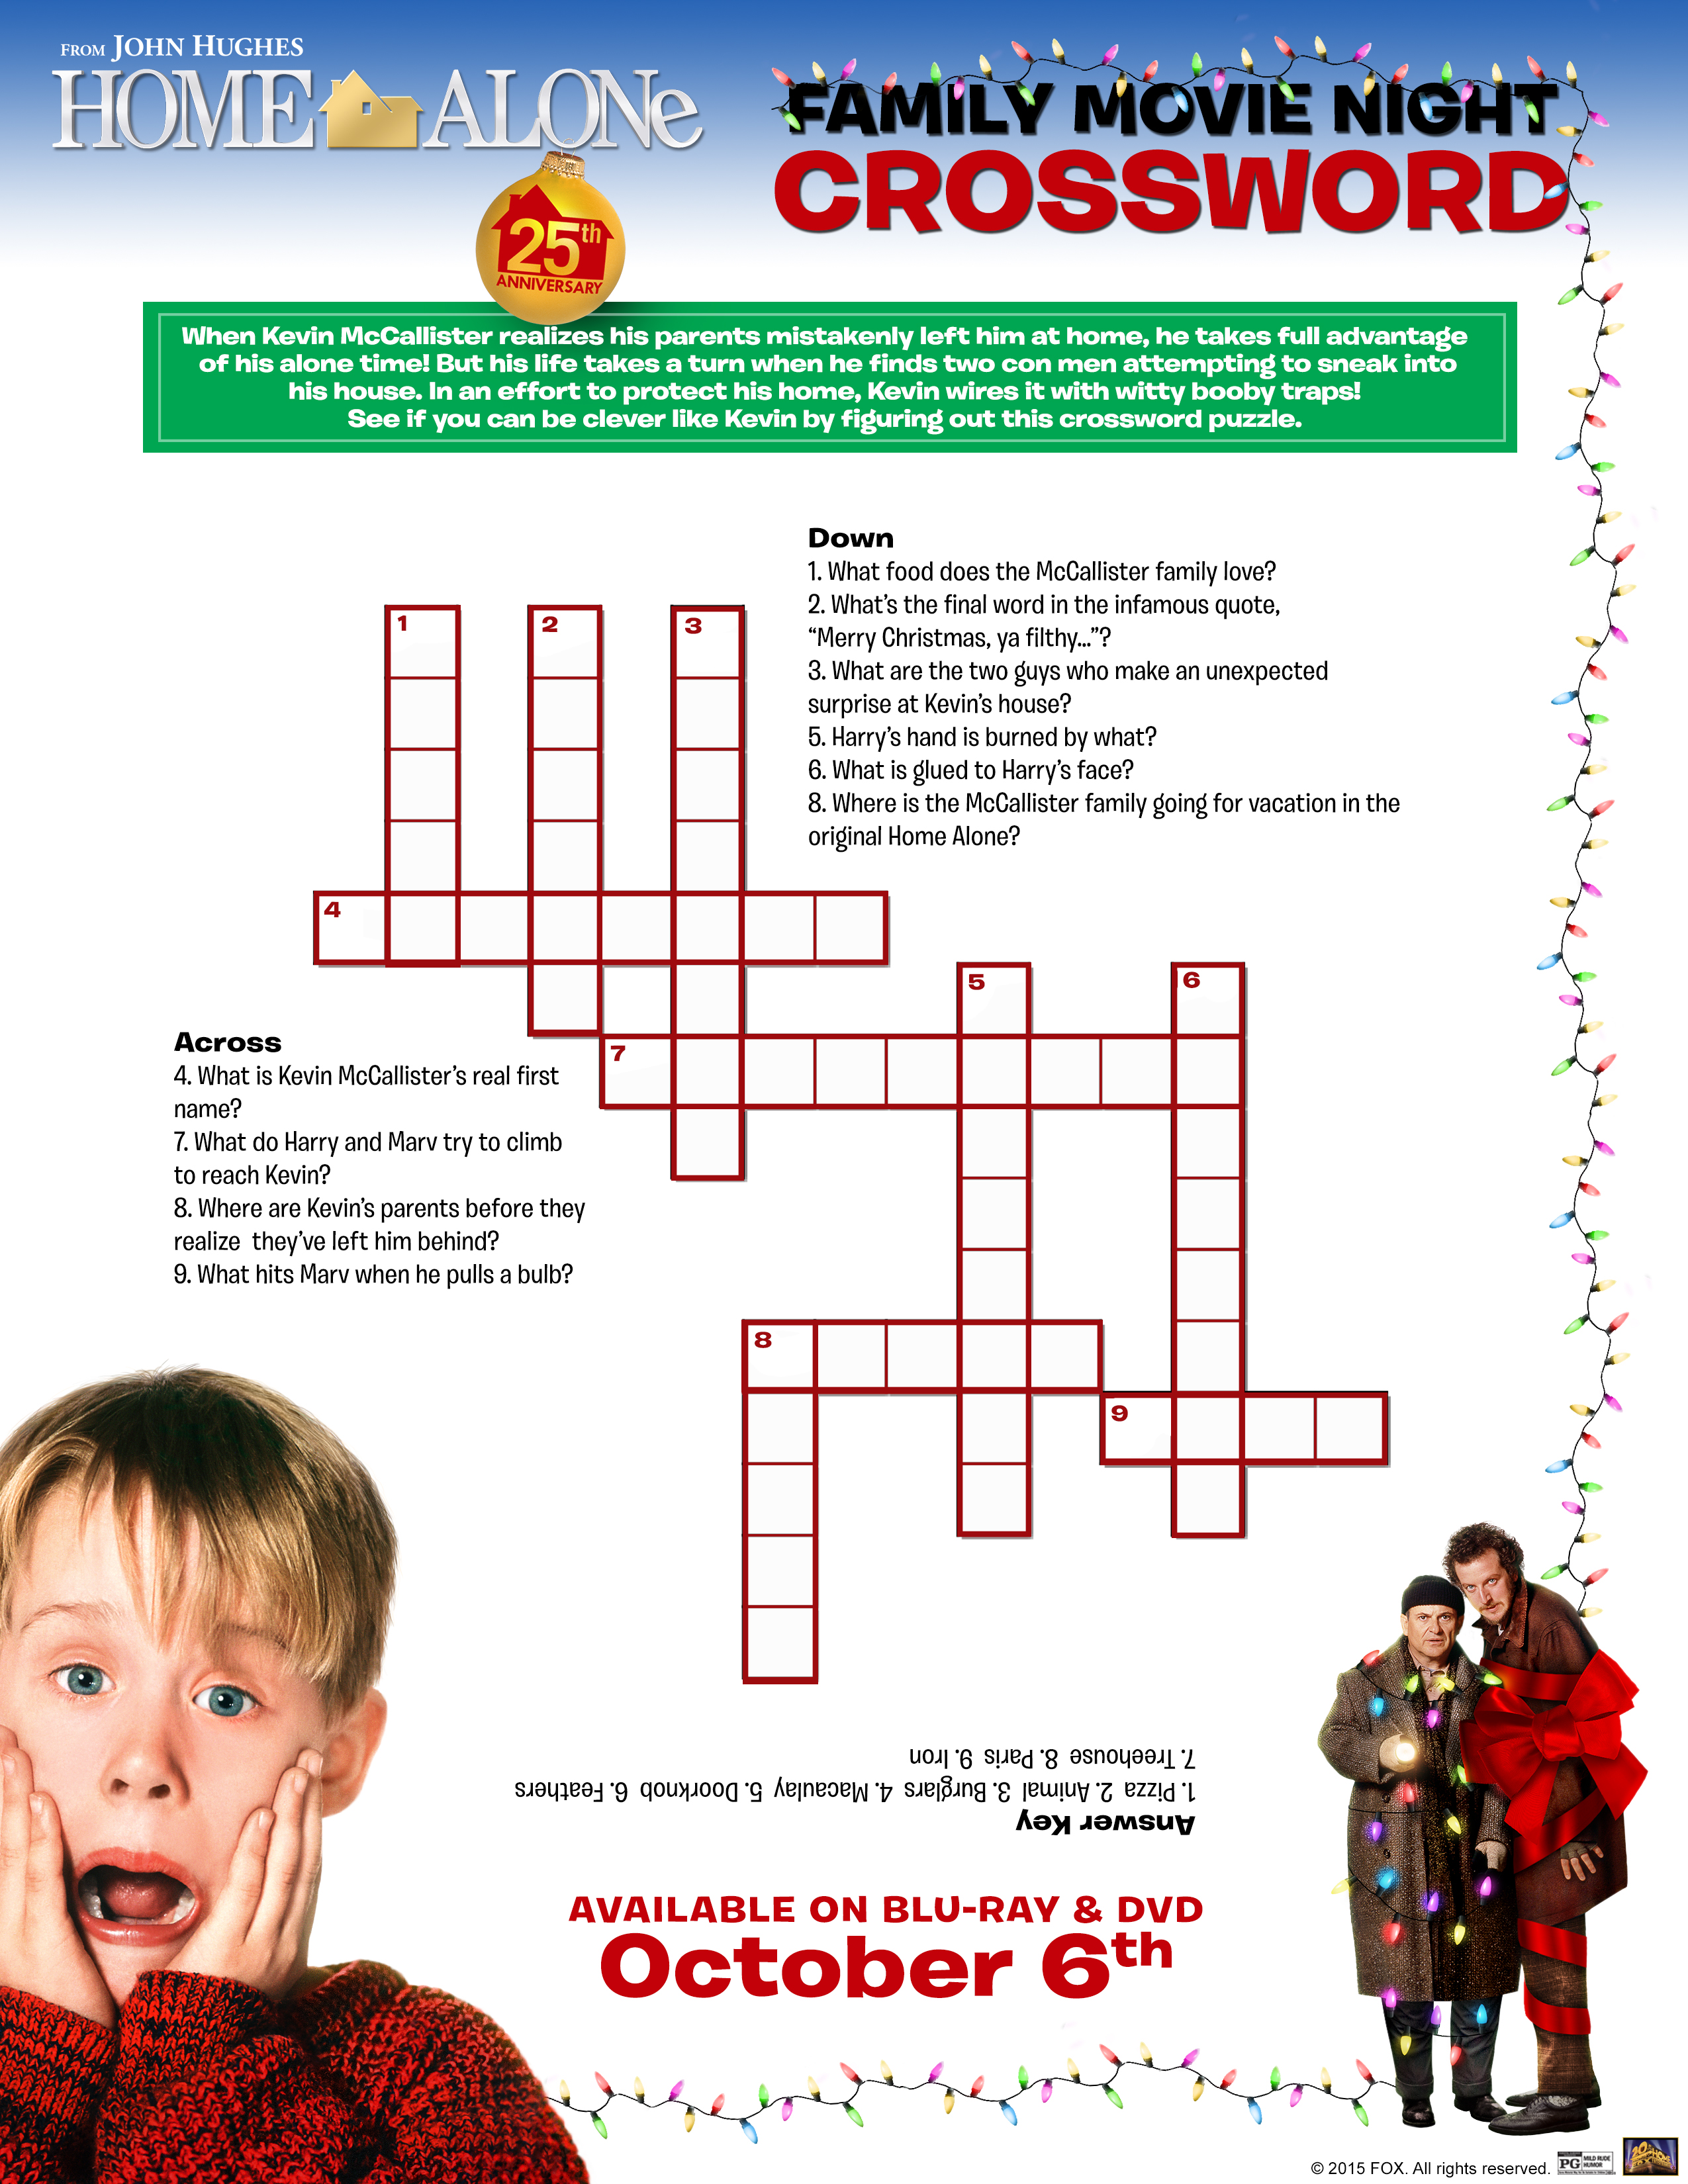 Home Alone: Ultimate Collector's Edition + Free Home Alone Activity Printables